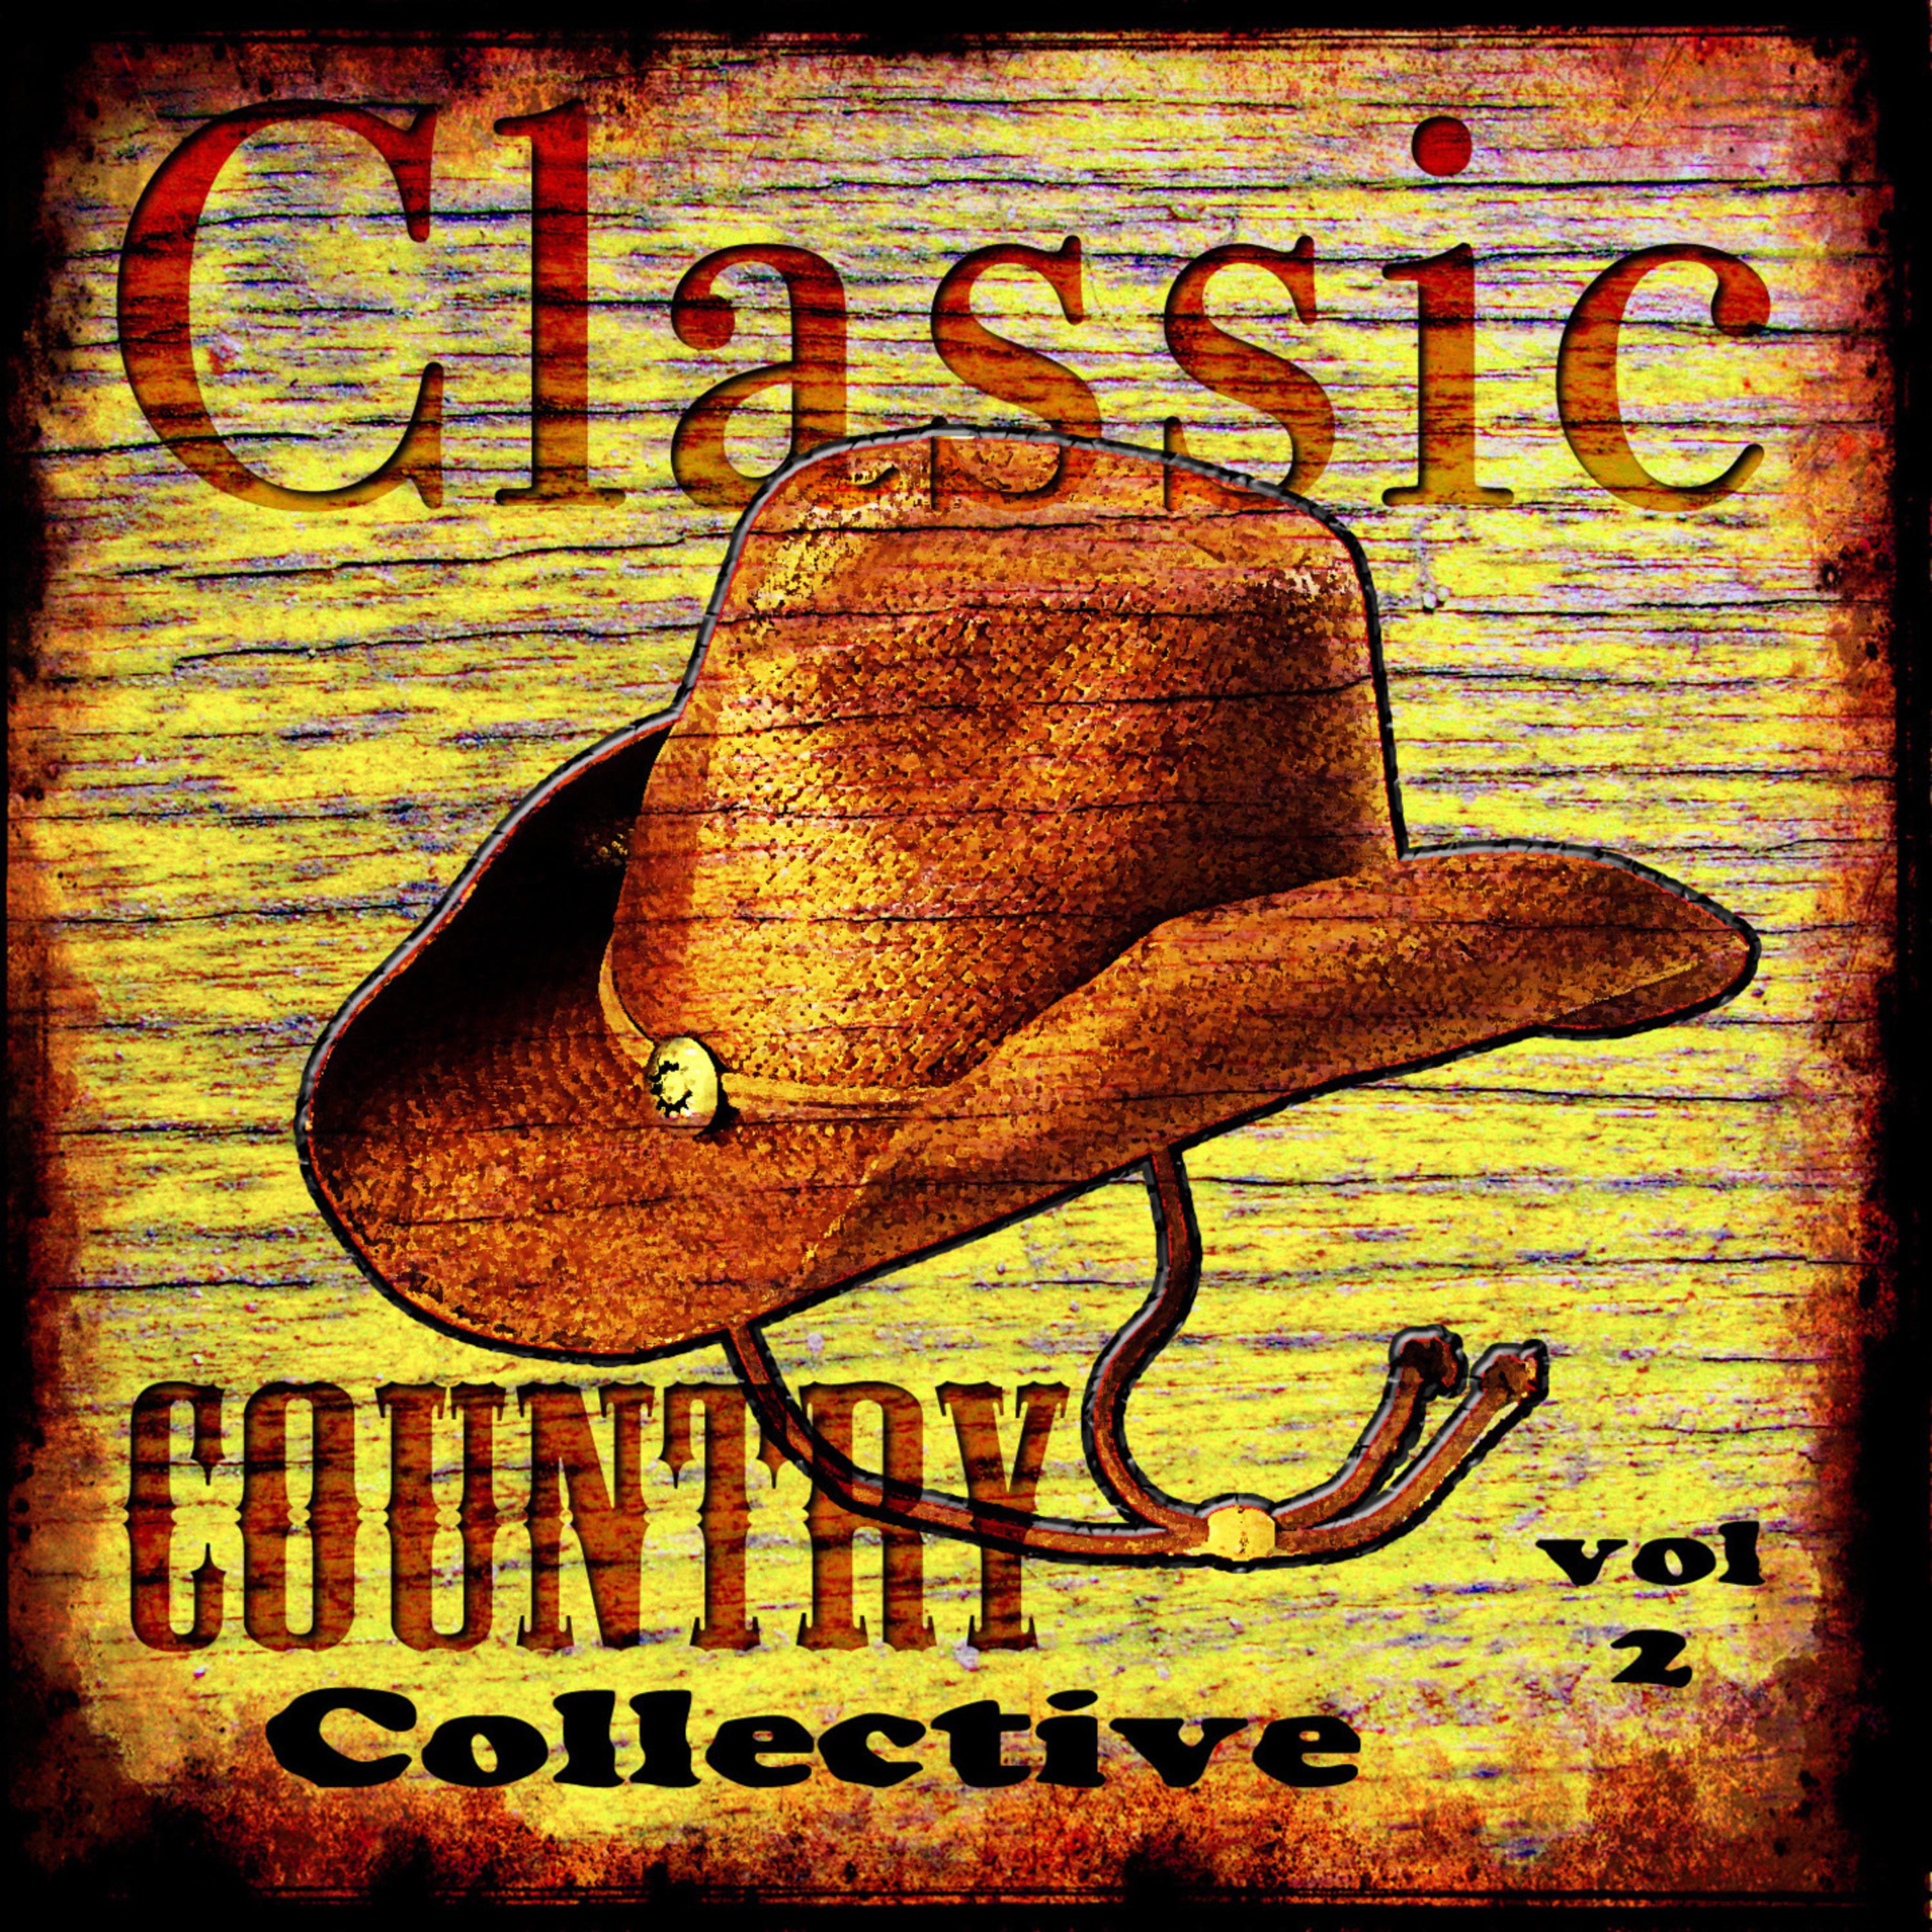 Classic Country Collective Volume 2